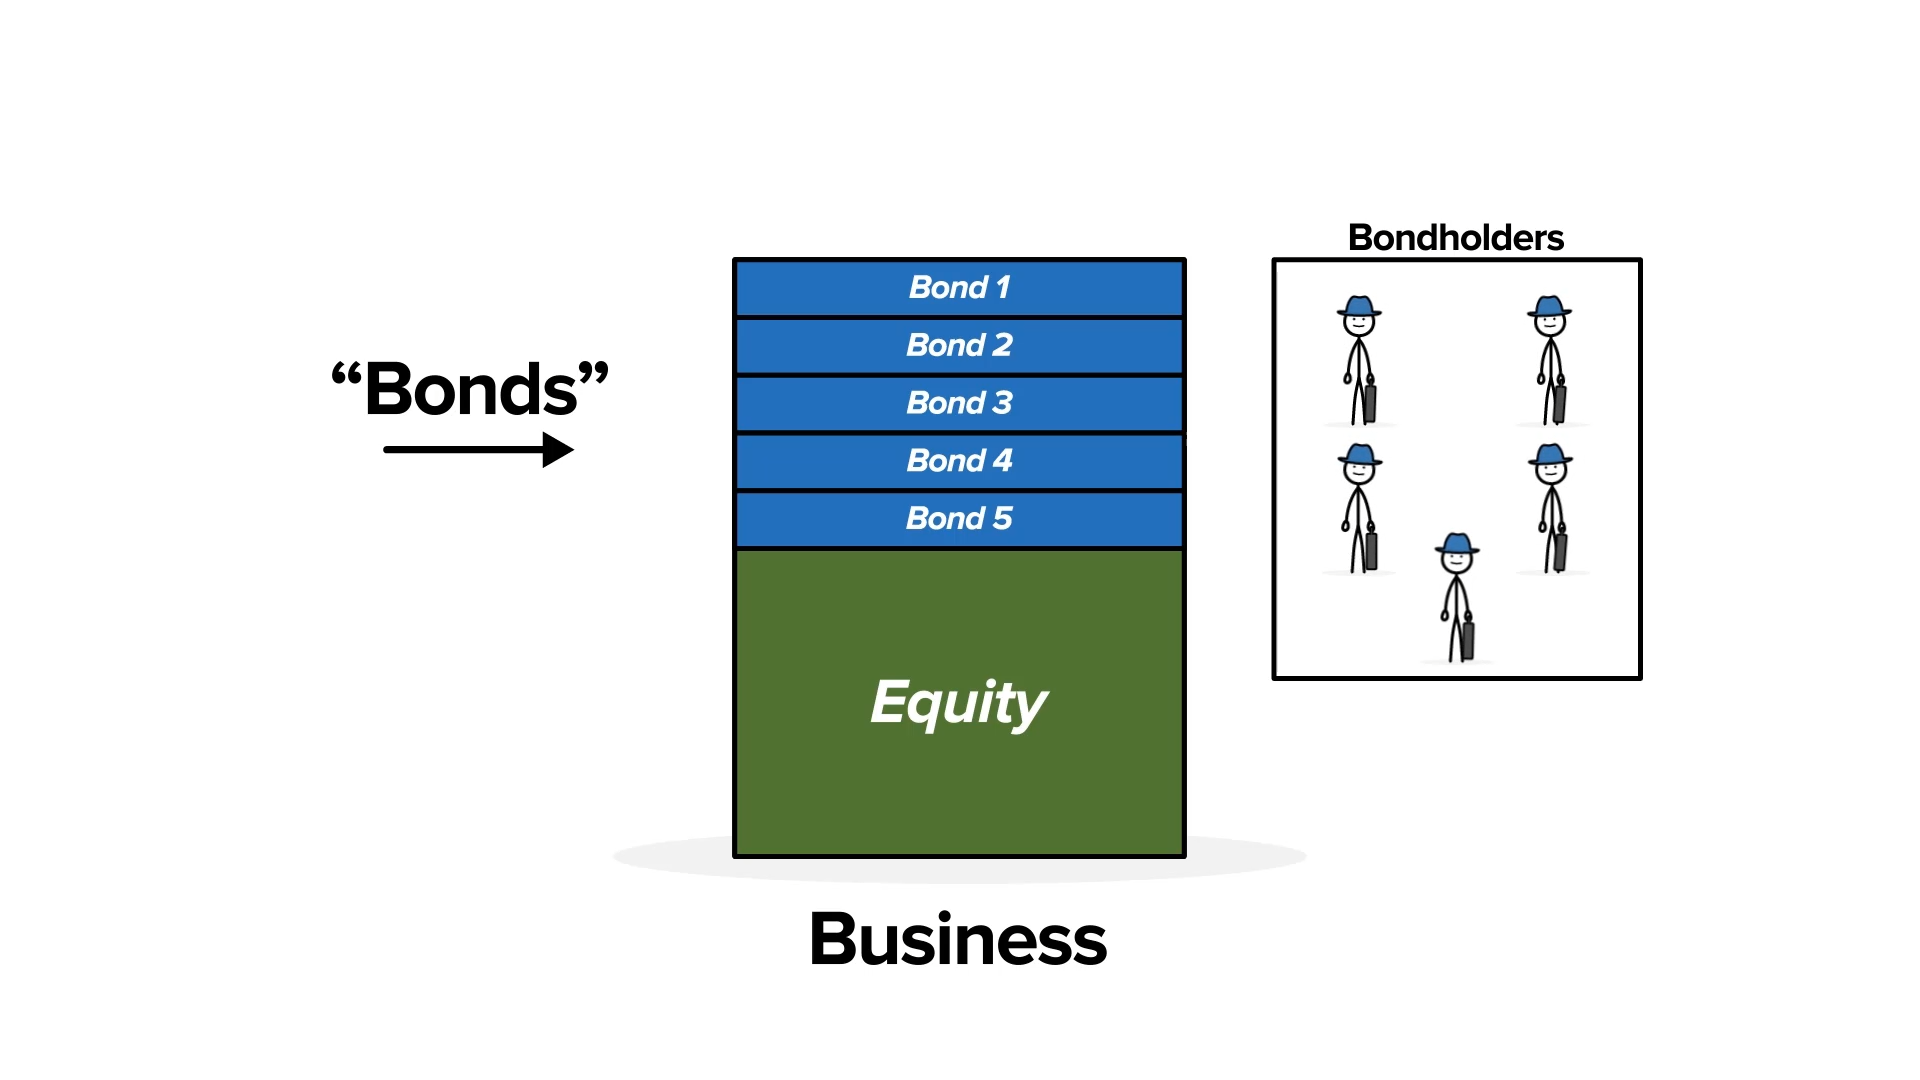 An image showing that Debt for a business is broken down into Bonds